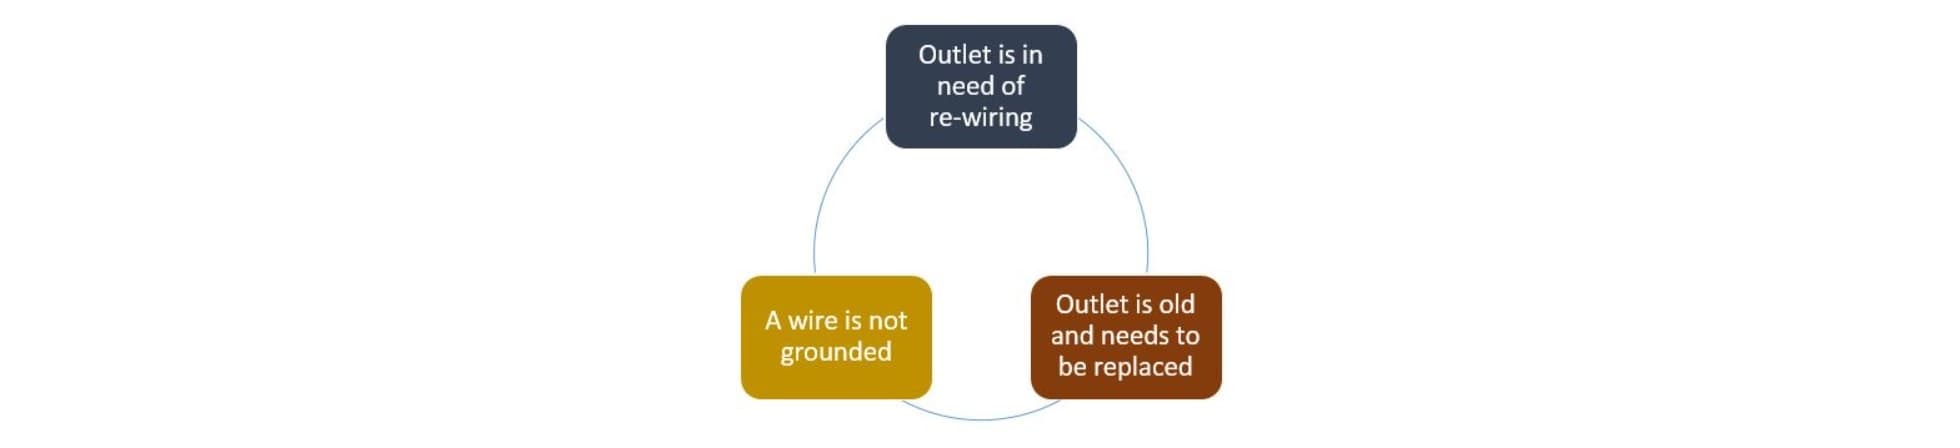 Reasons for overheated outlets